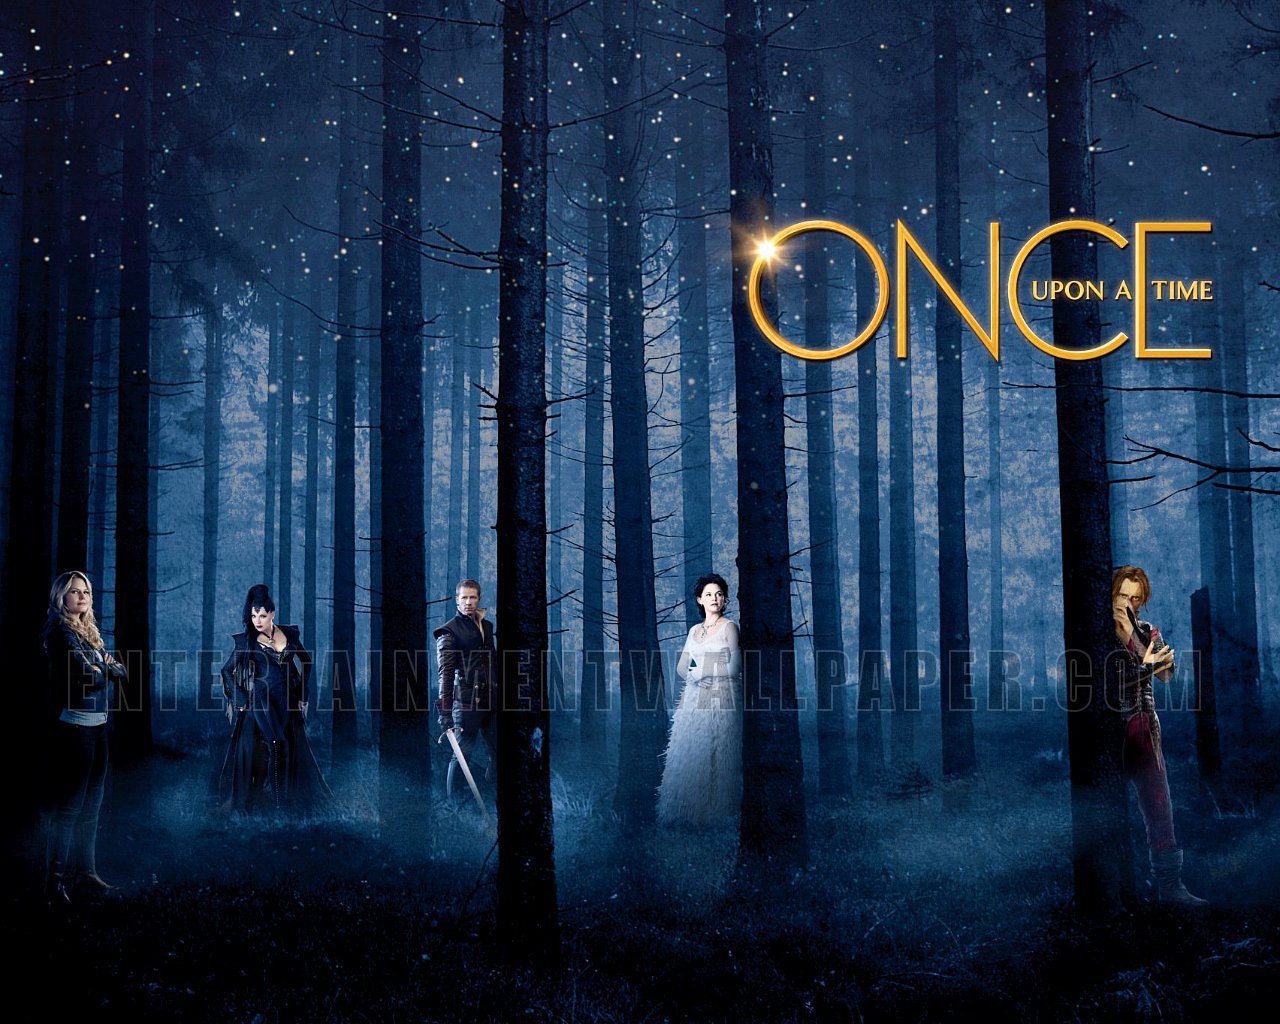 ouat wallpaper,natural environment,forest,darkness,tree,musical theatre